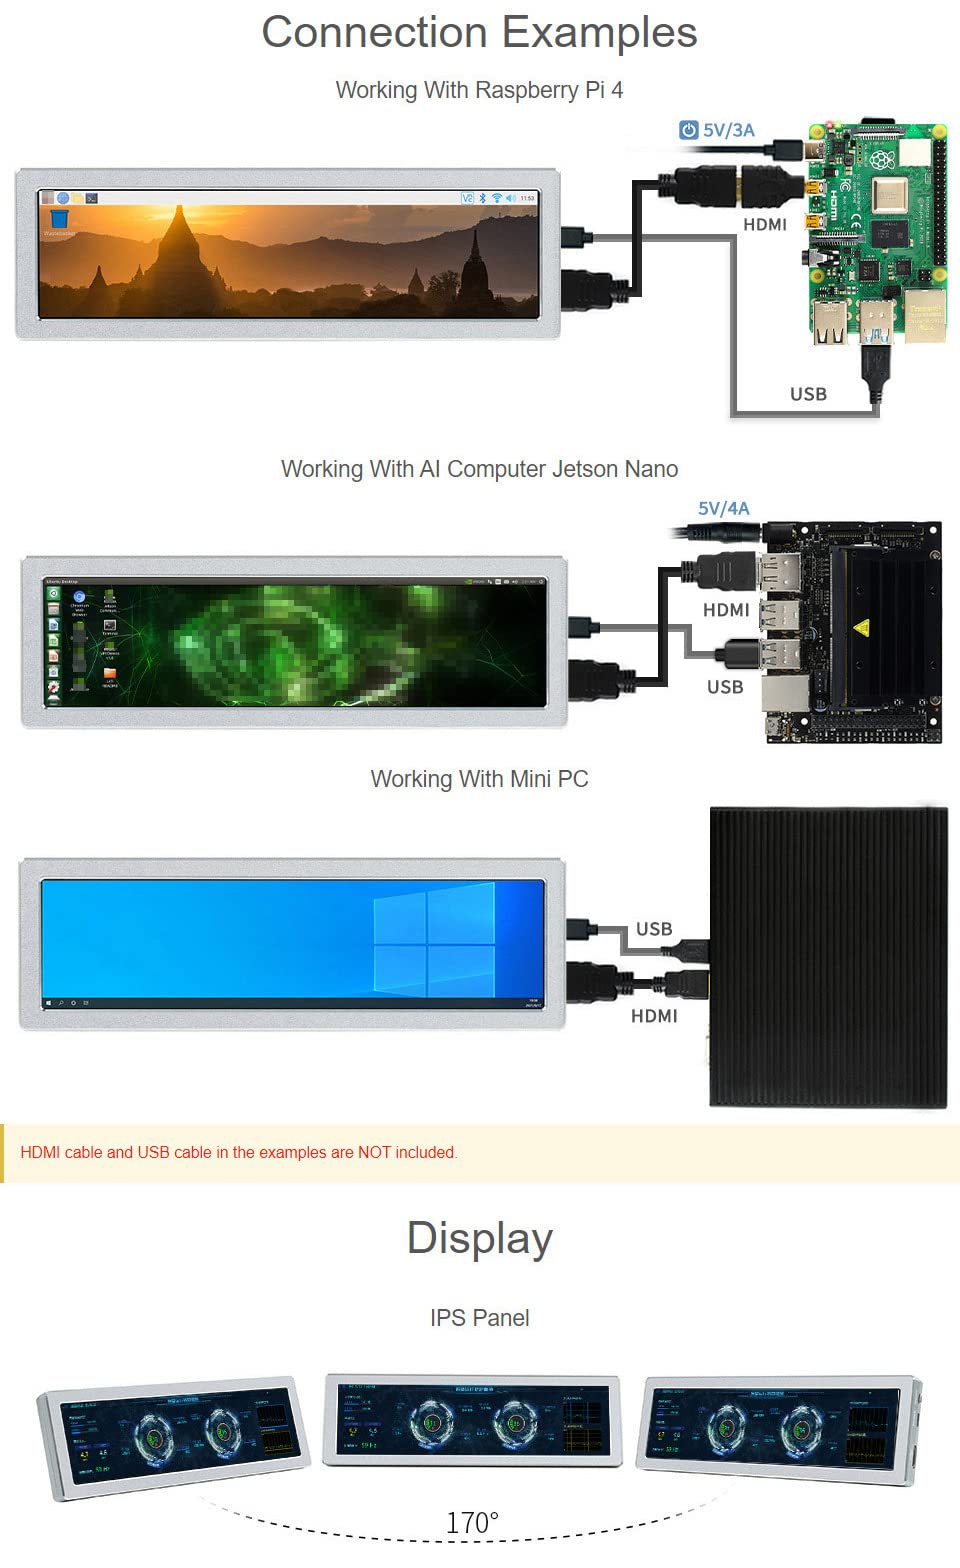 Waveshare 8.8inch Side Monitor Compatible with Raspberry Pi 4B/3B+/3A+/2B/B+/A+/Zero/Zero W/WH/Zero 2W CM3+/4 480×1920 Resolution HDMI IPS HiFi Speaker Supports Jetson Nano/Windows